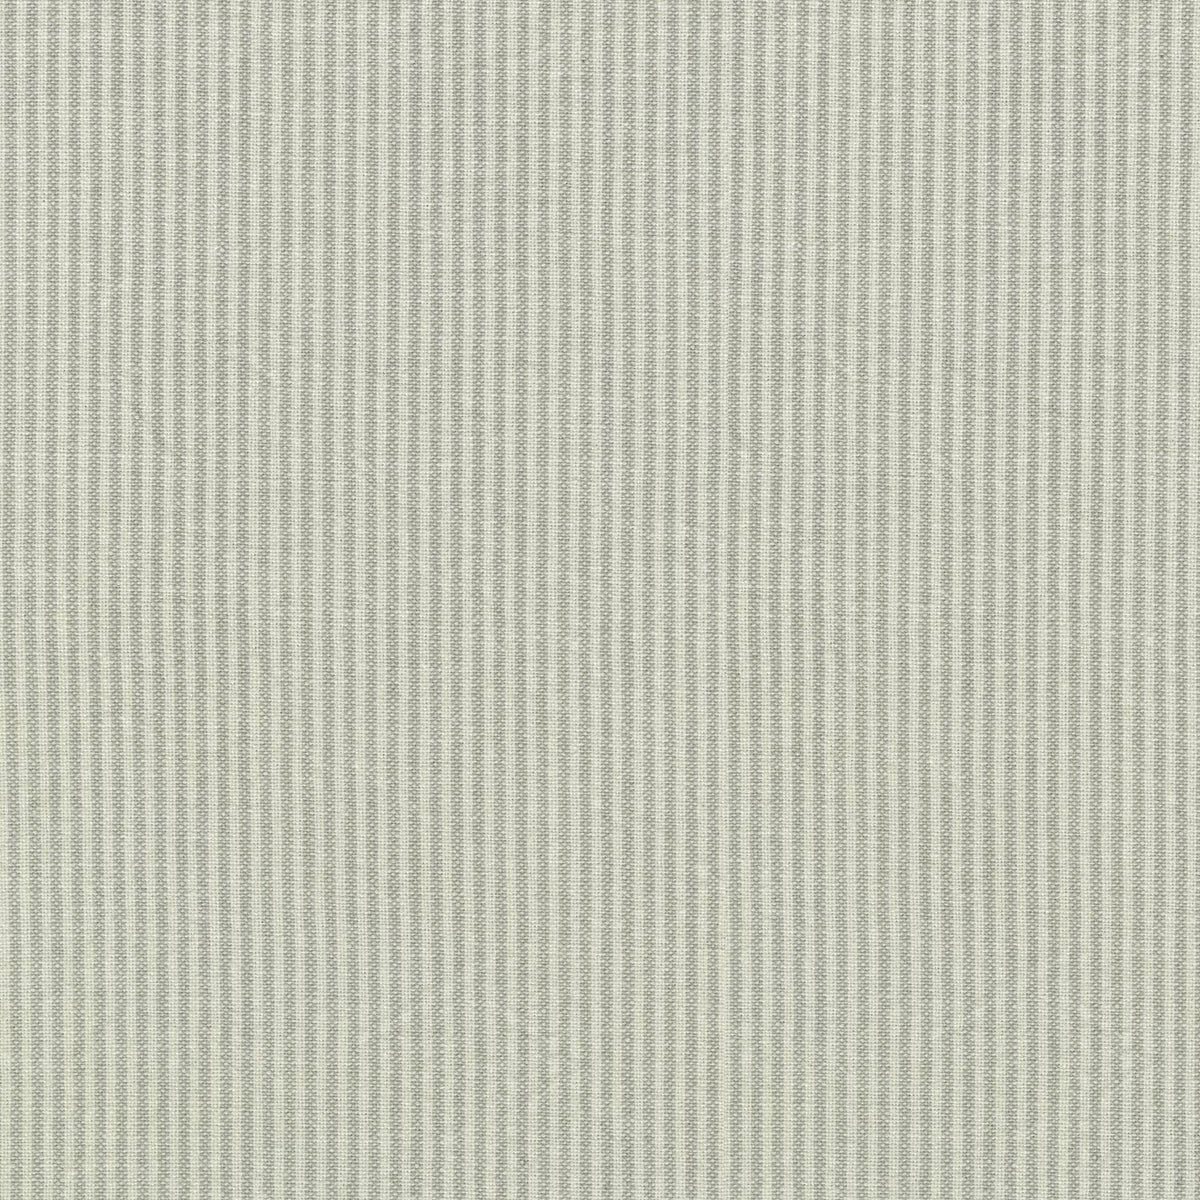 P/K Lifestyles Cullen Ticking - Dove 410719 Upholstery Fabric